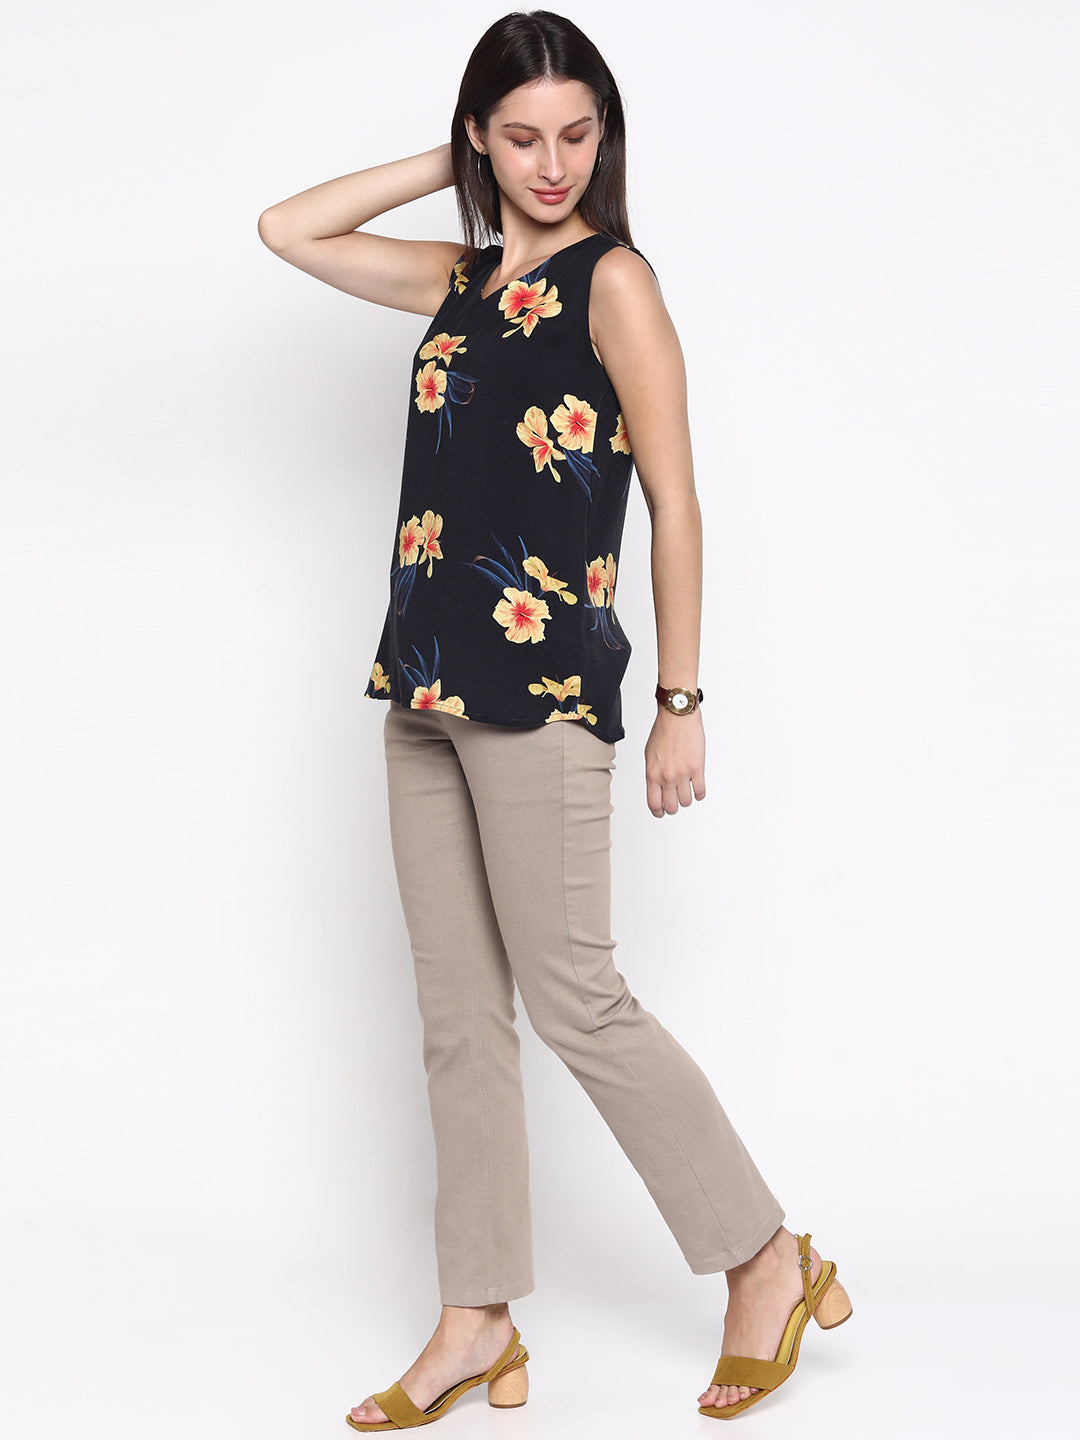 Hibiscus 'Viscose' Floral Sleeveless Top